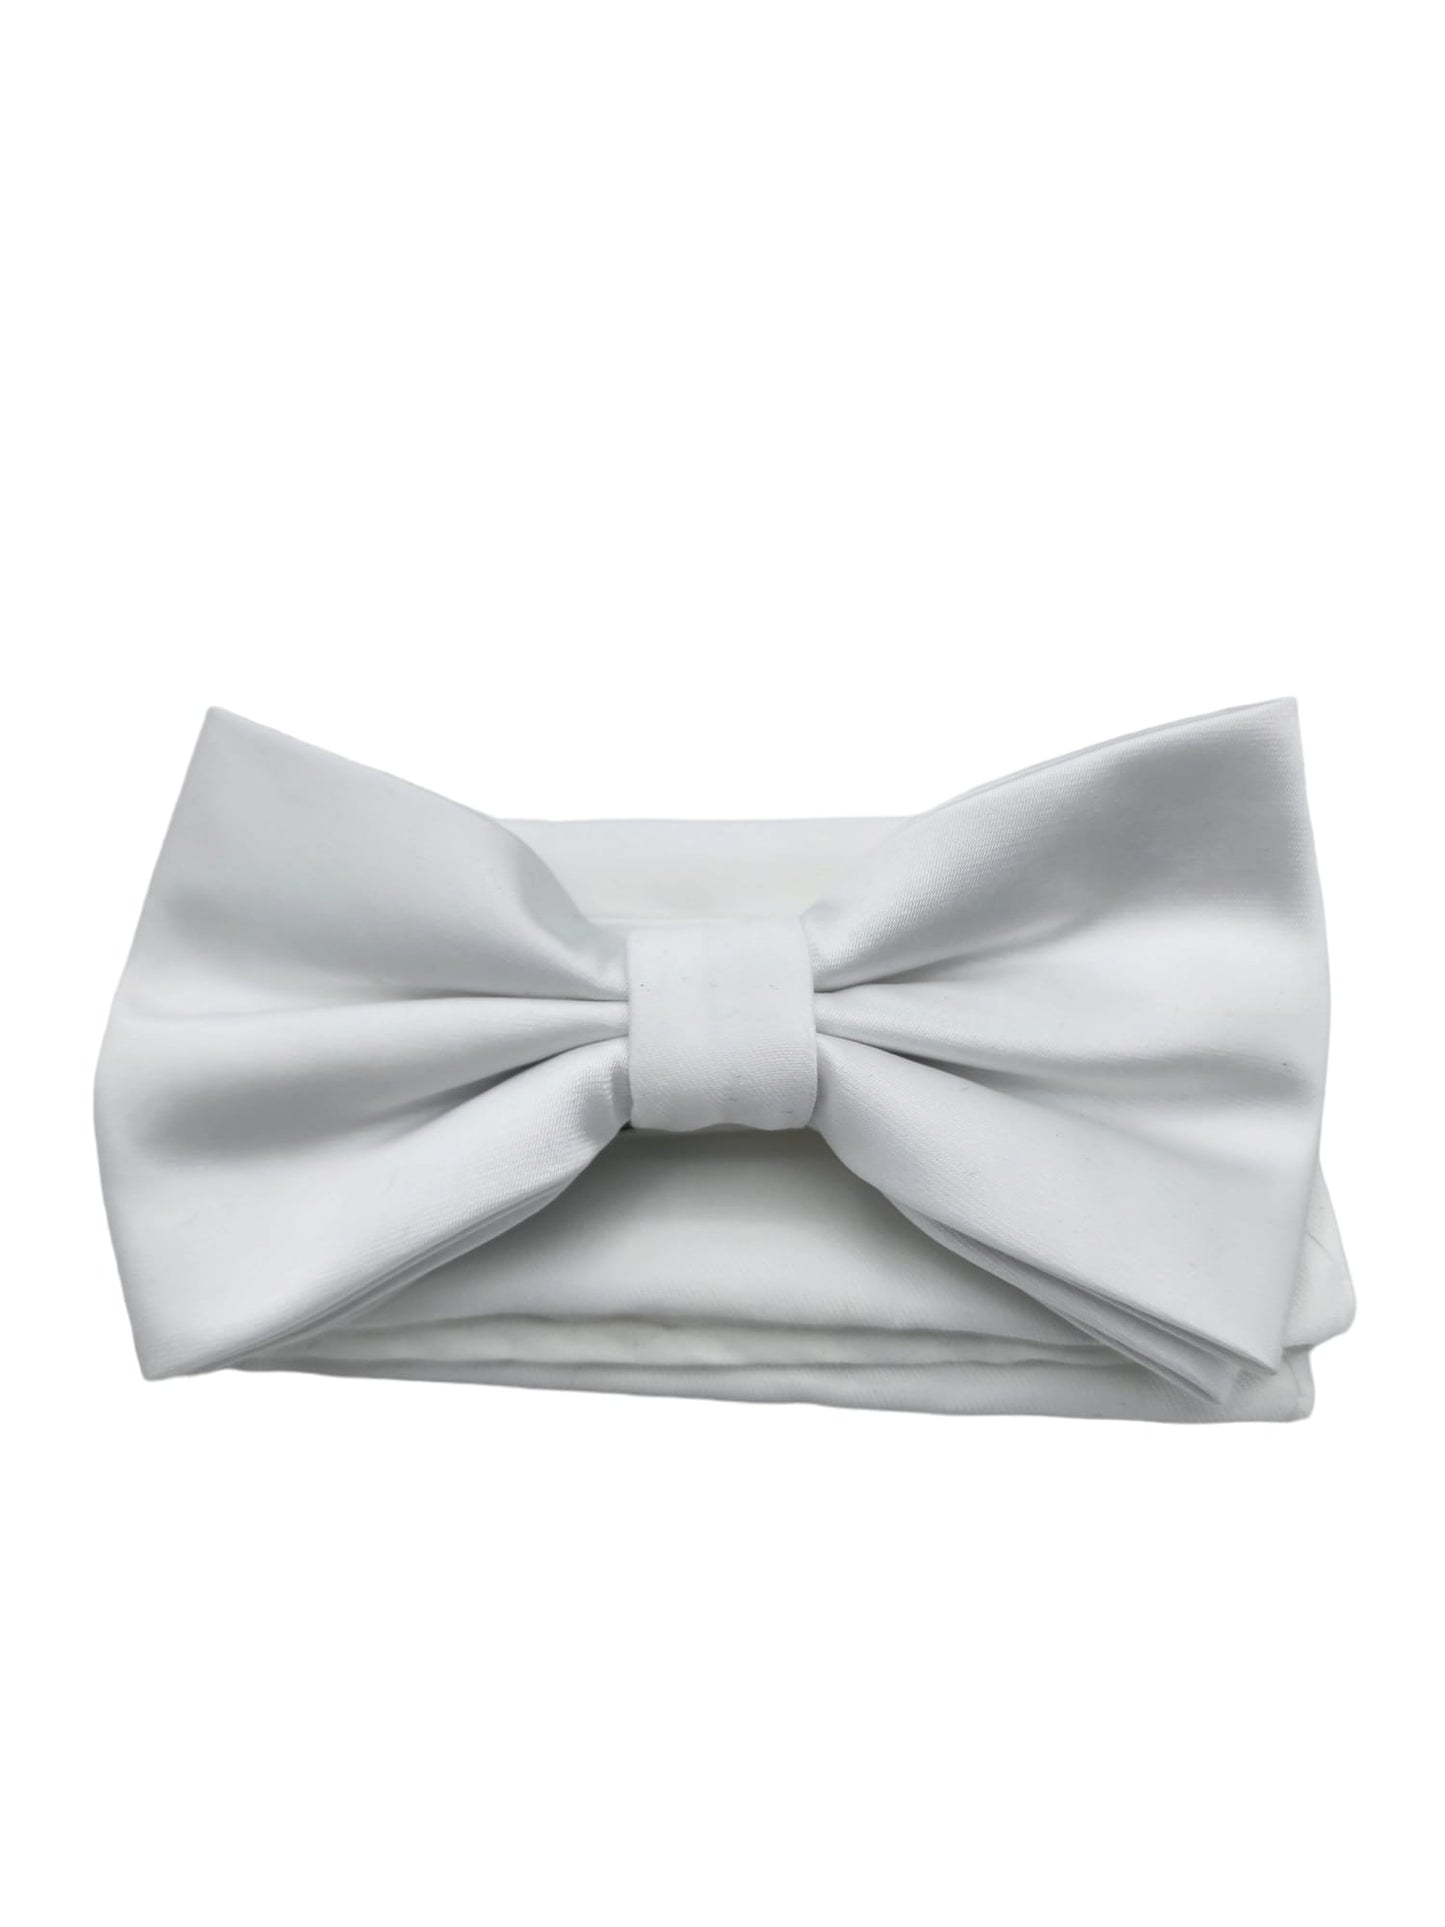 Giovanni Testi Classic White Bow Tie with Hanky BT100-A